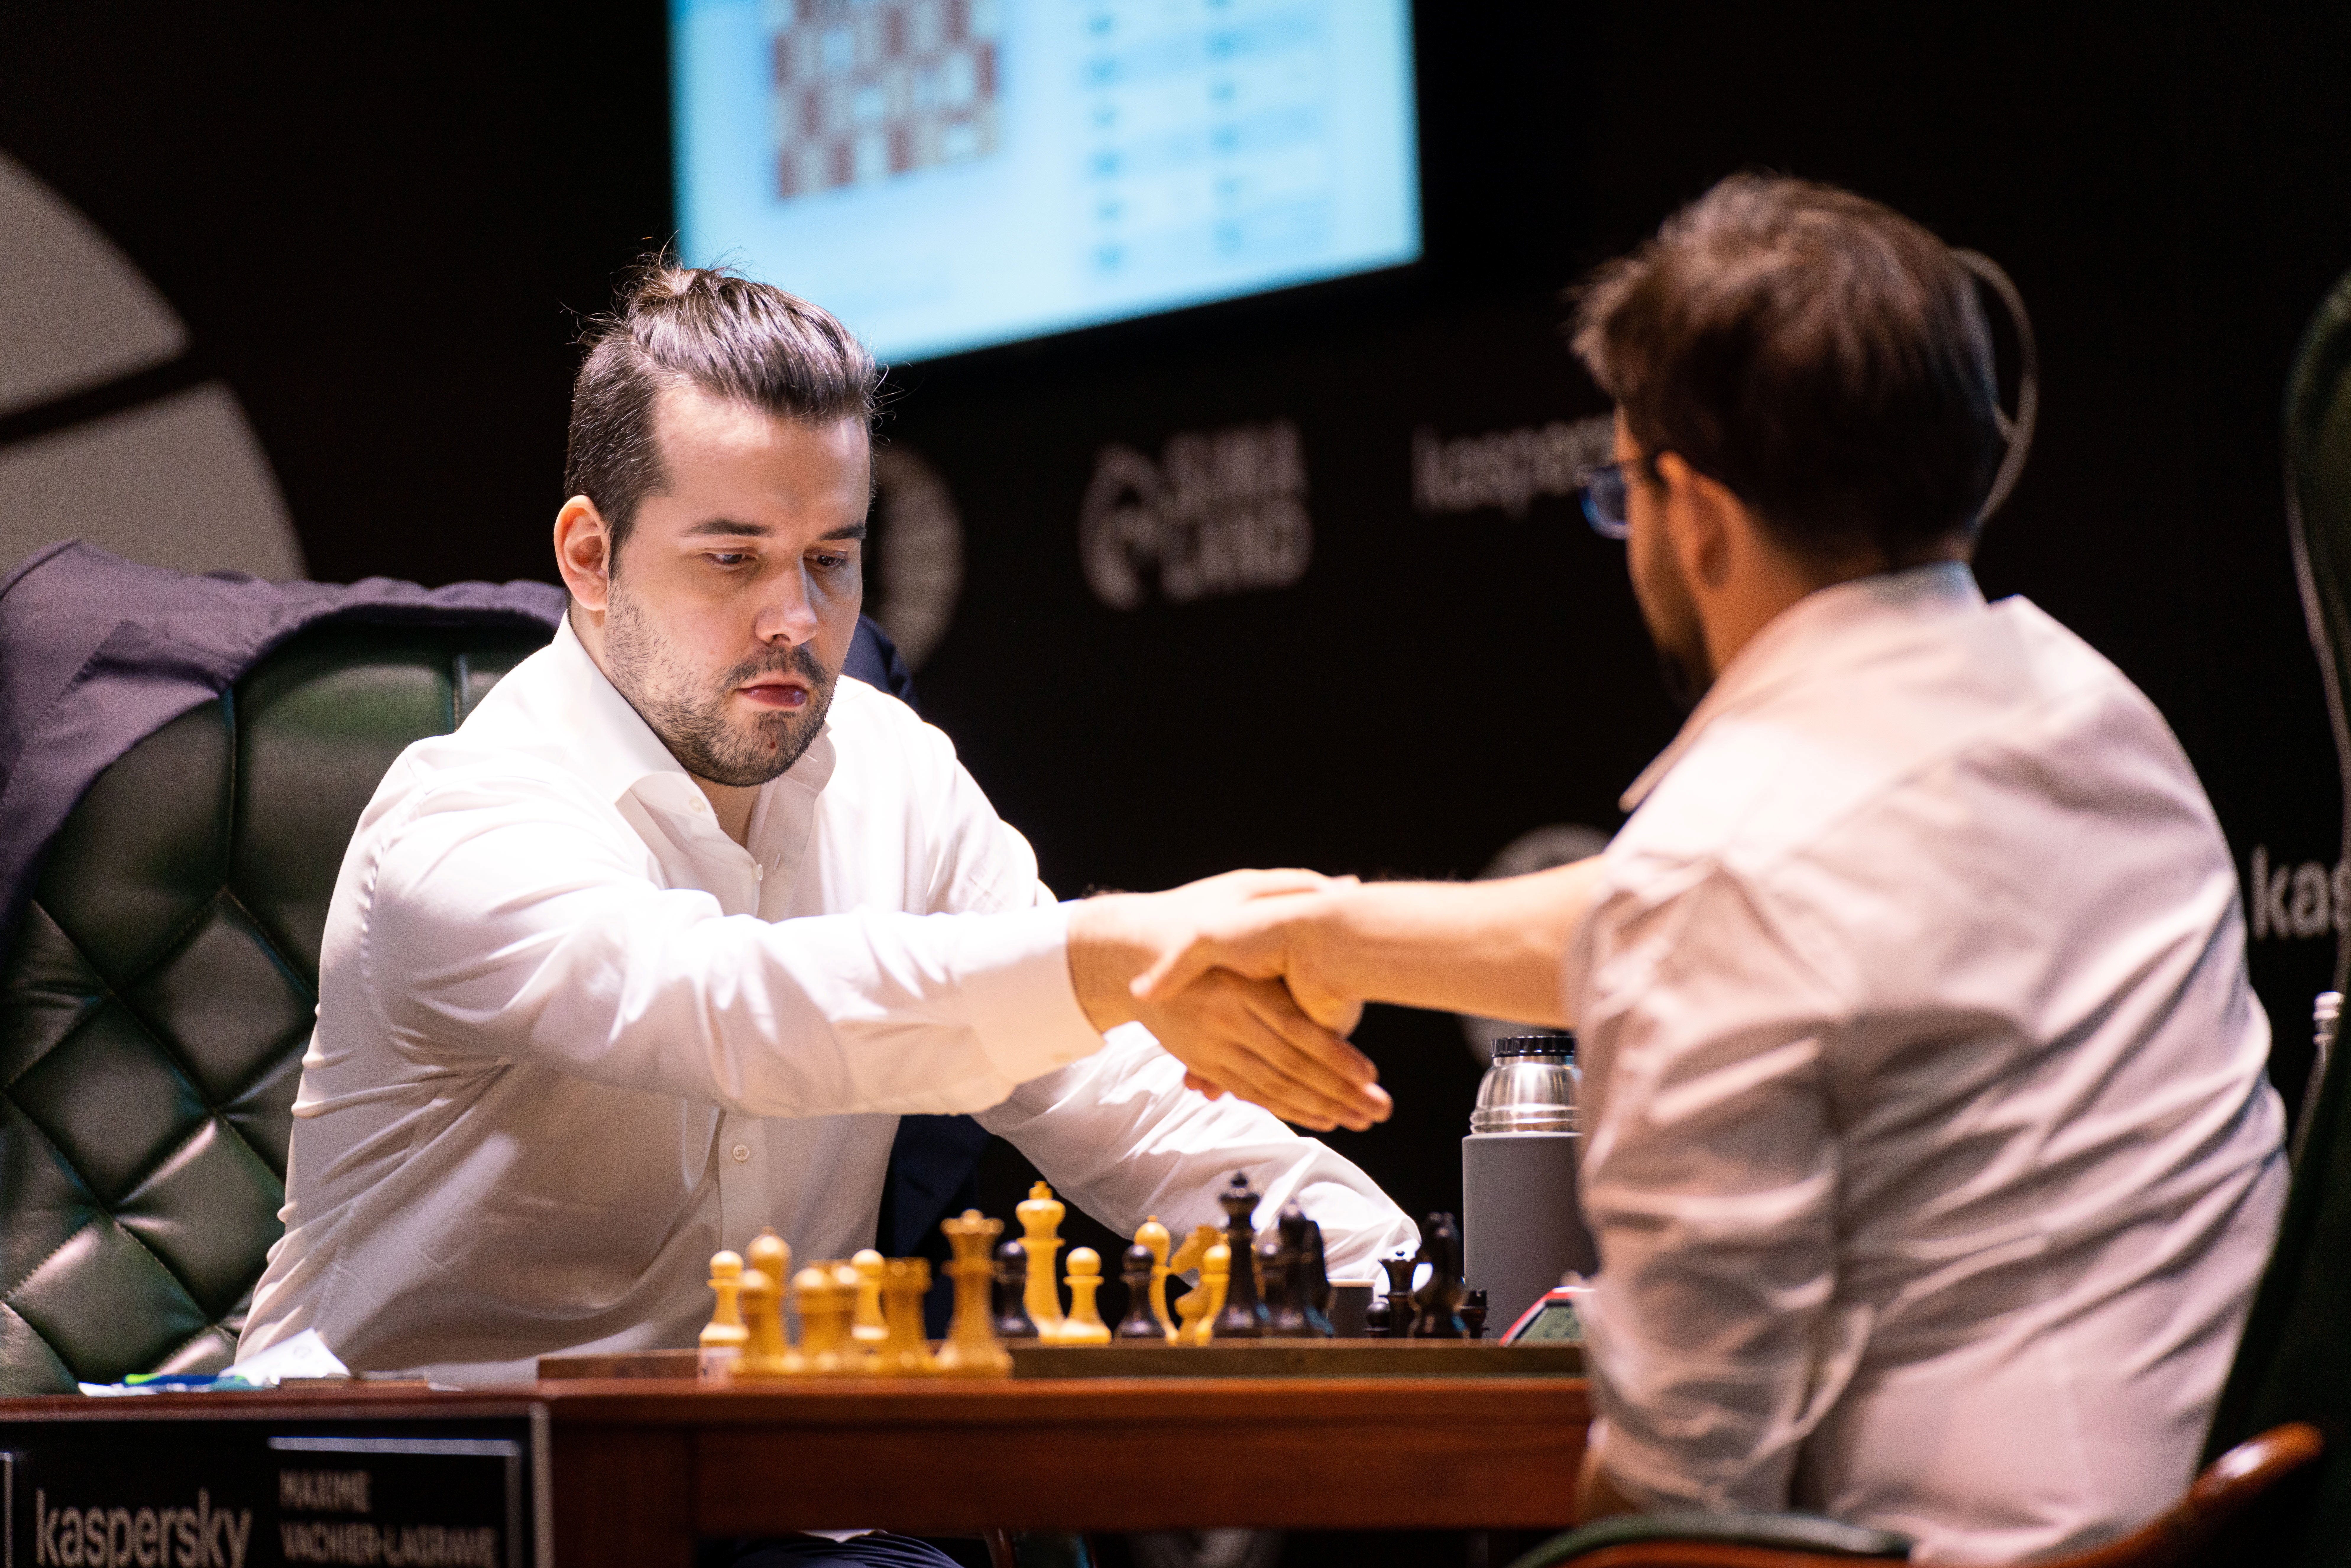 International Chess Federation on X: Nepomniachtchi's win over